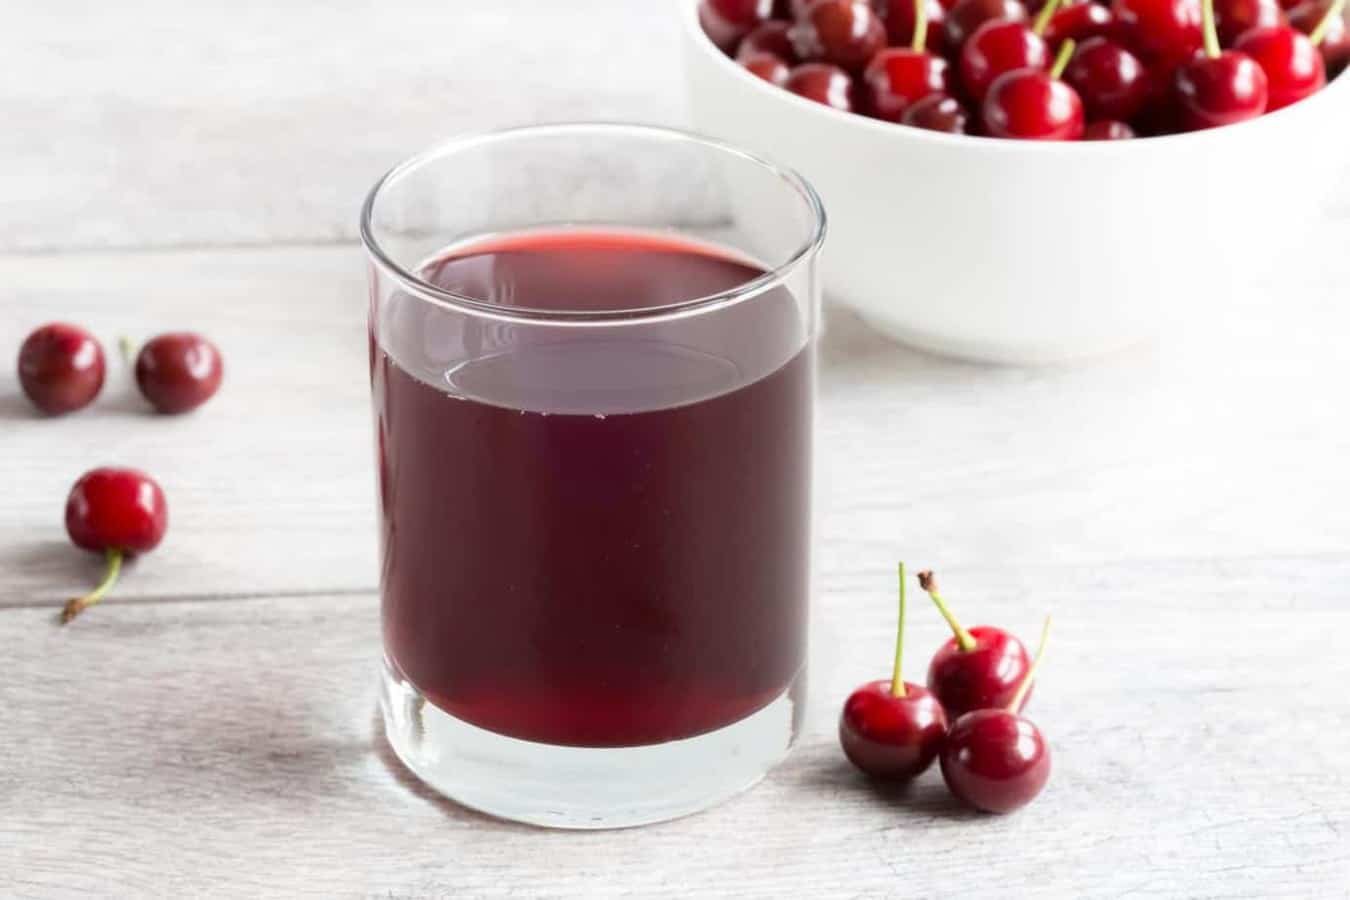 Montmorency Tart Cherries May Provide Benefits For Adults With Metabolic Syndrome